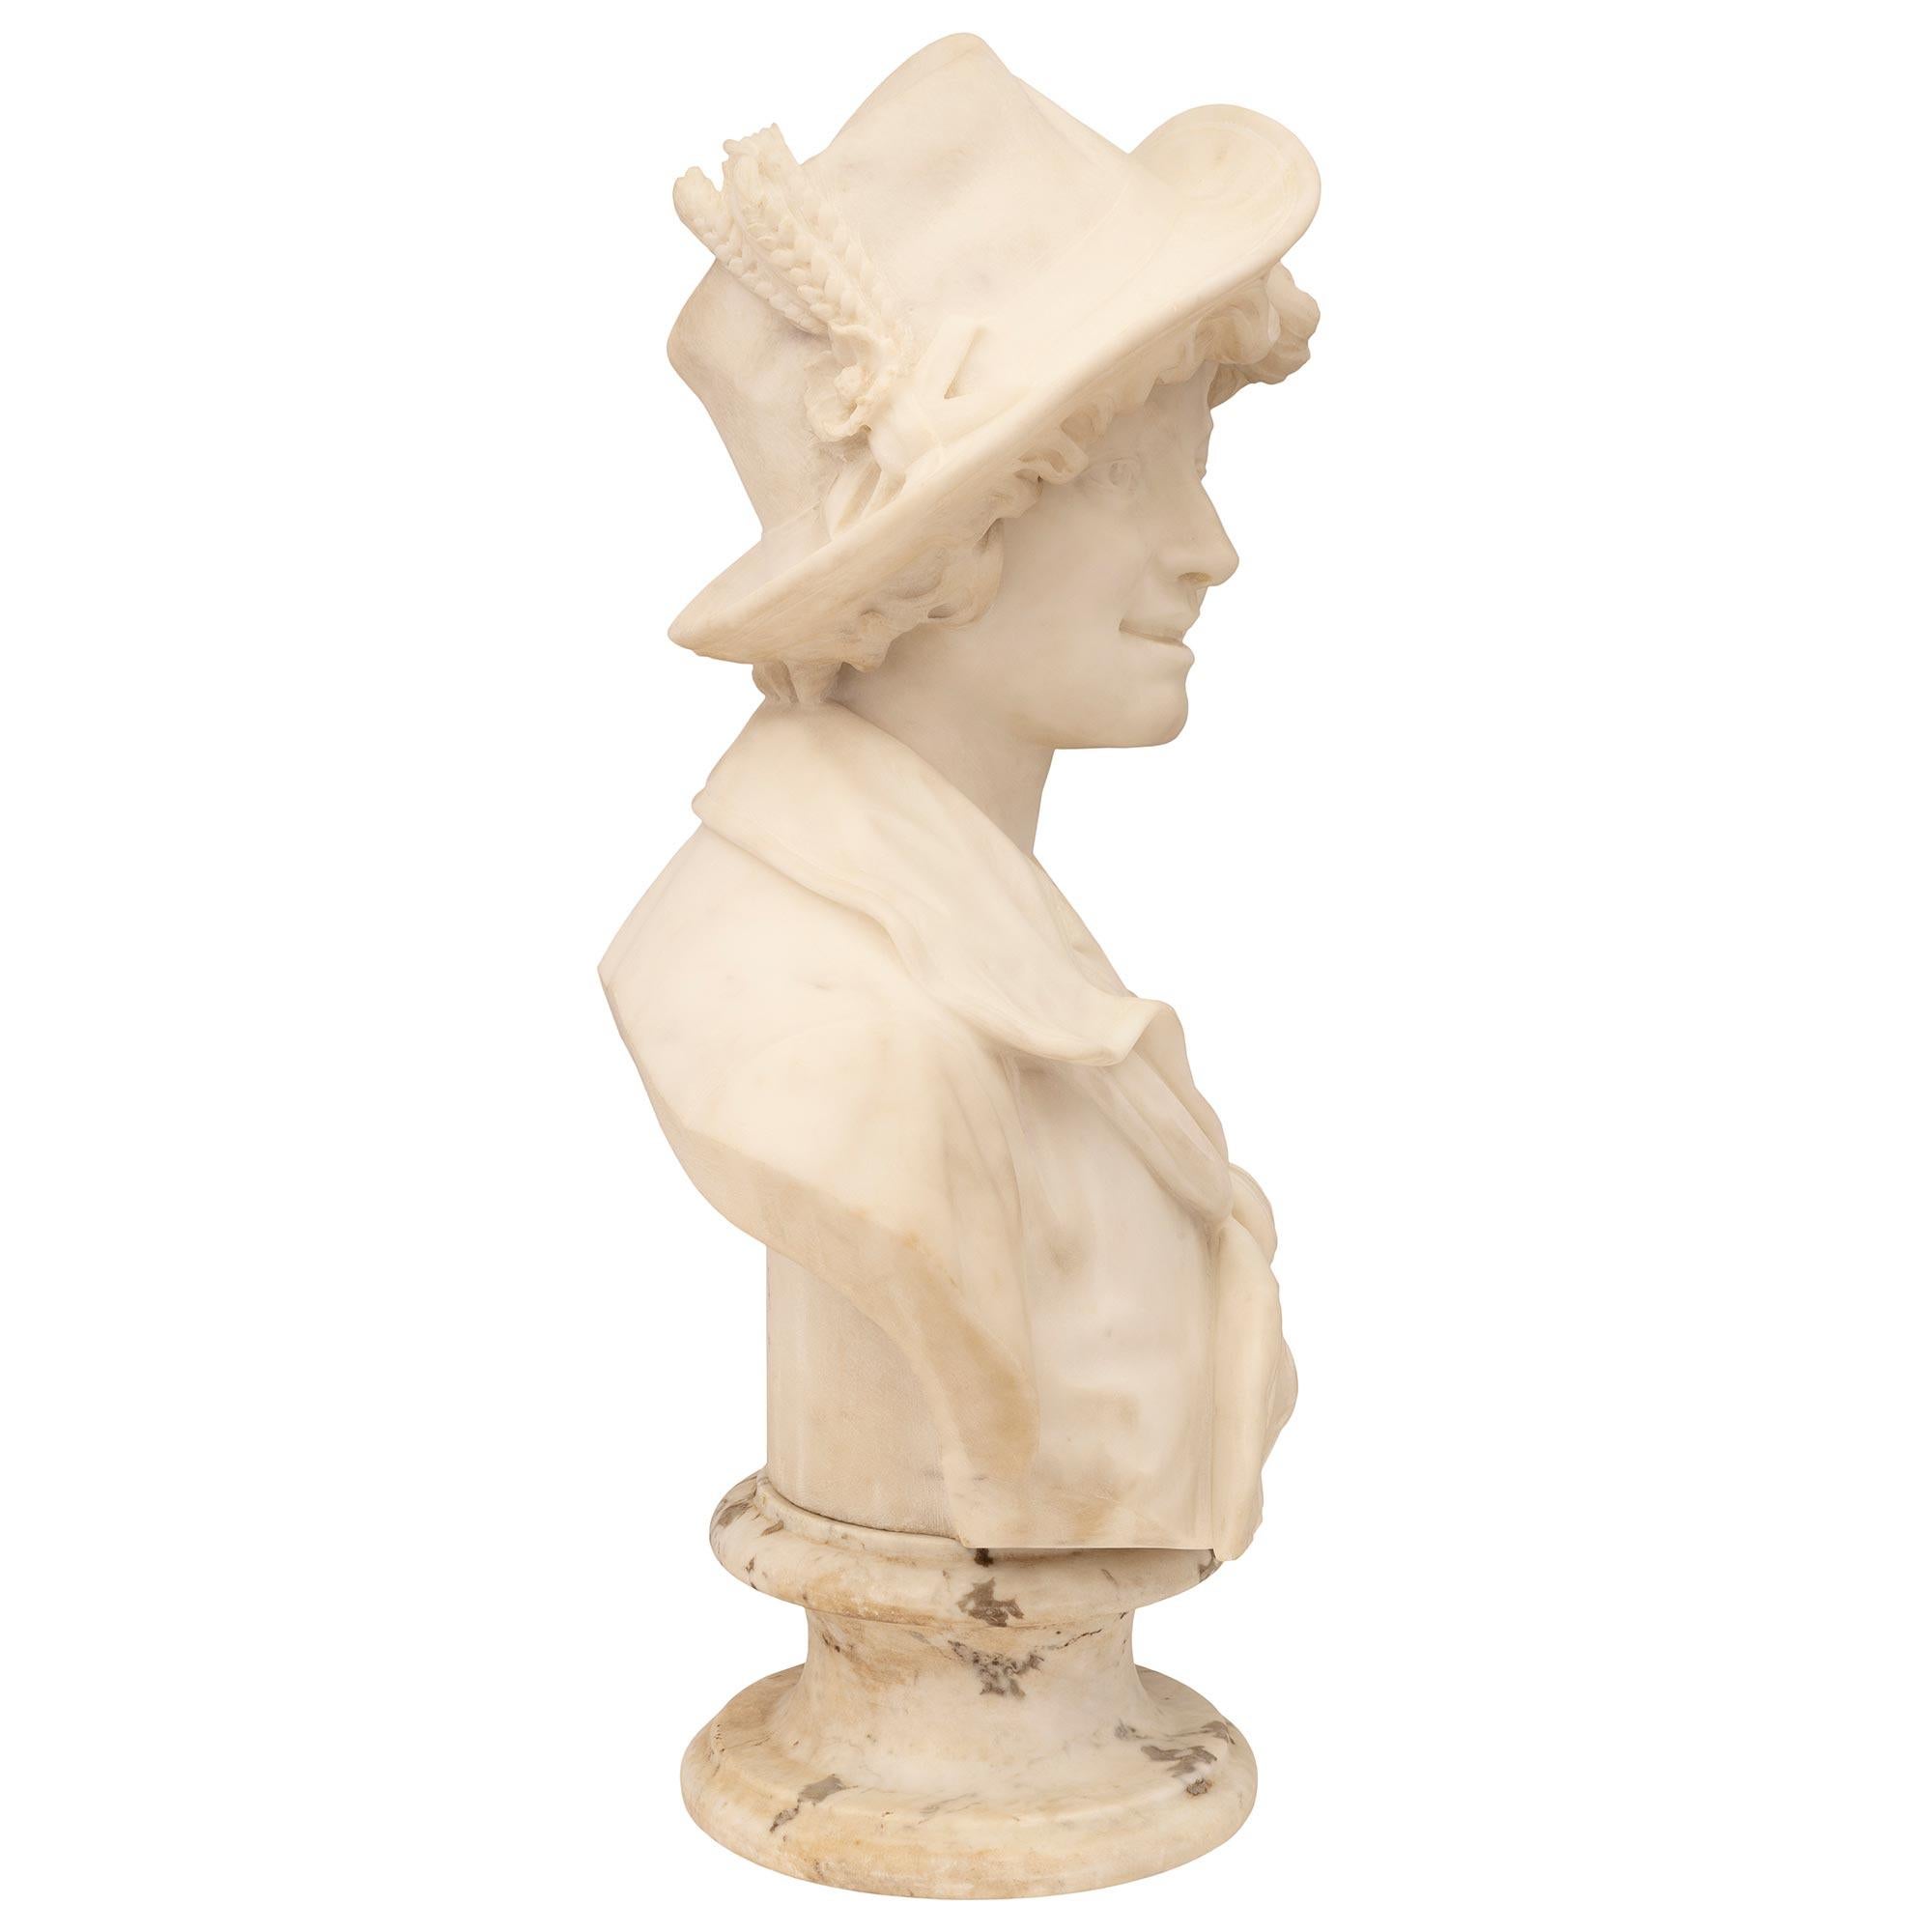 Italian 19th Century White Carrara Marble Bust of a Young Boy In Good Condition For Sale In West Palm Beach, FL